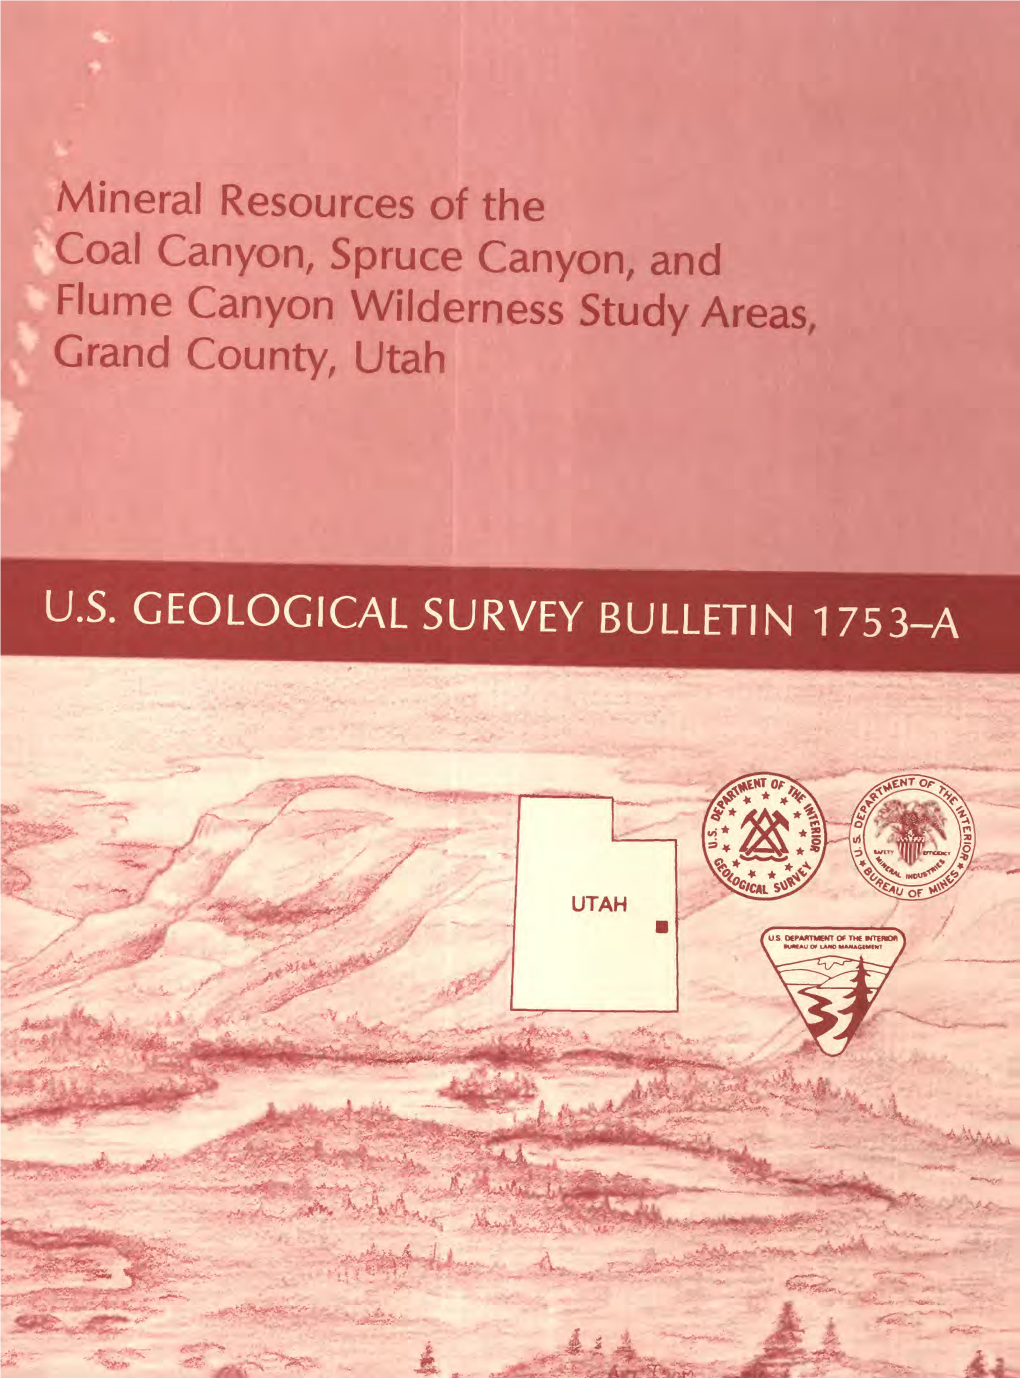 Mineral Resources of the Coal Canyon, Spruce Canyon, and Flume Canyon Wilderness Study Areas, Grand County, Utah